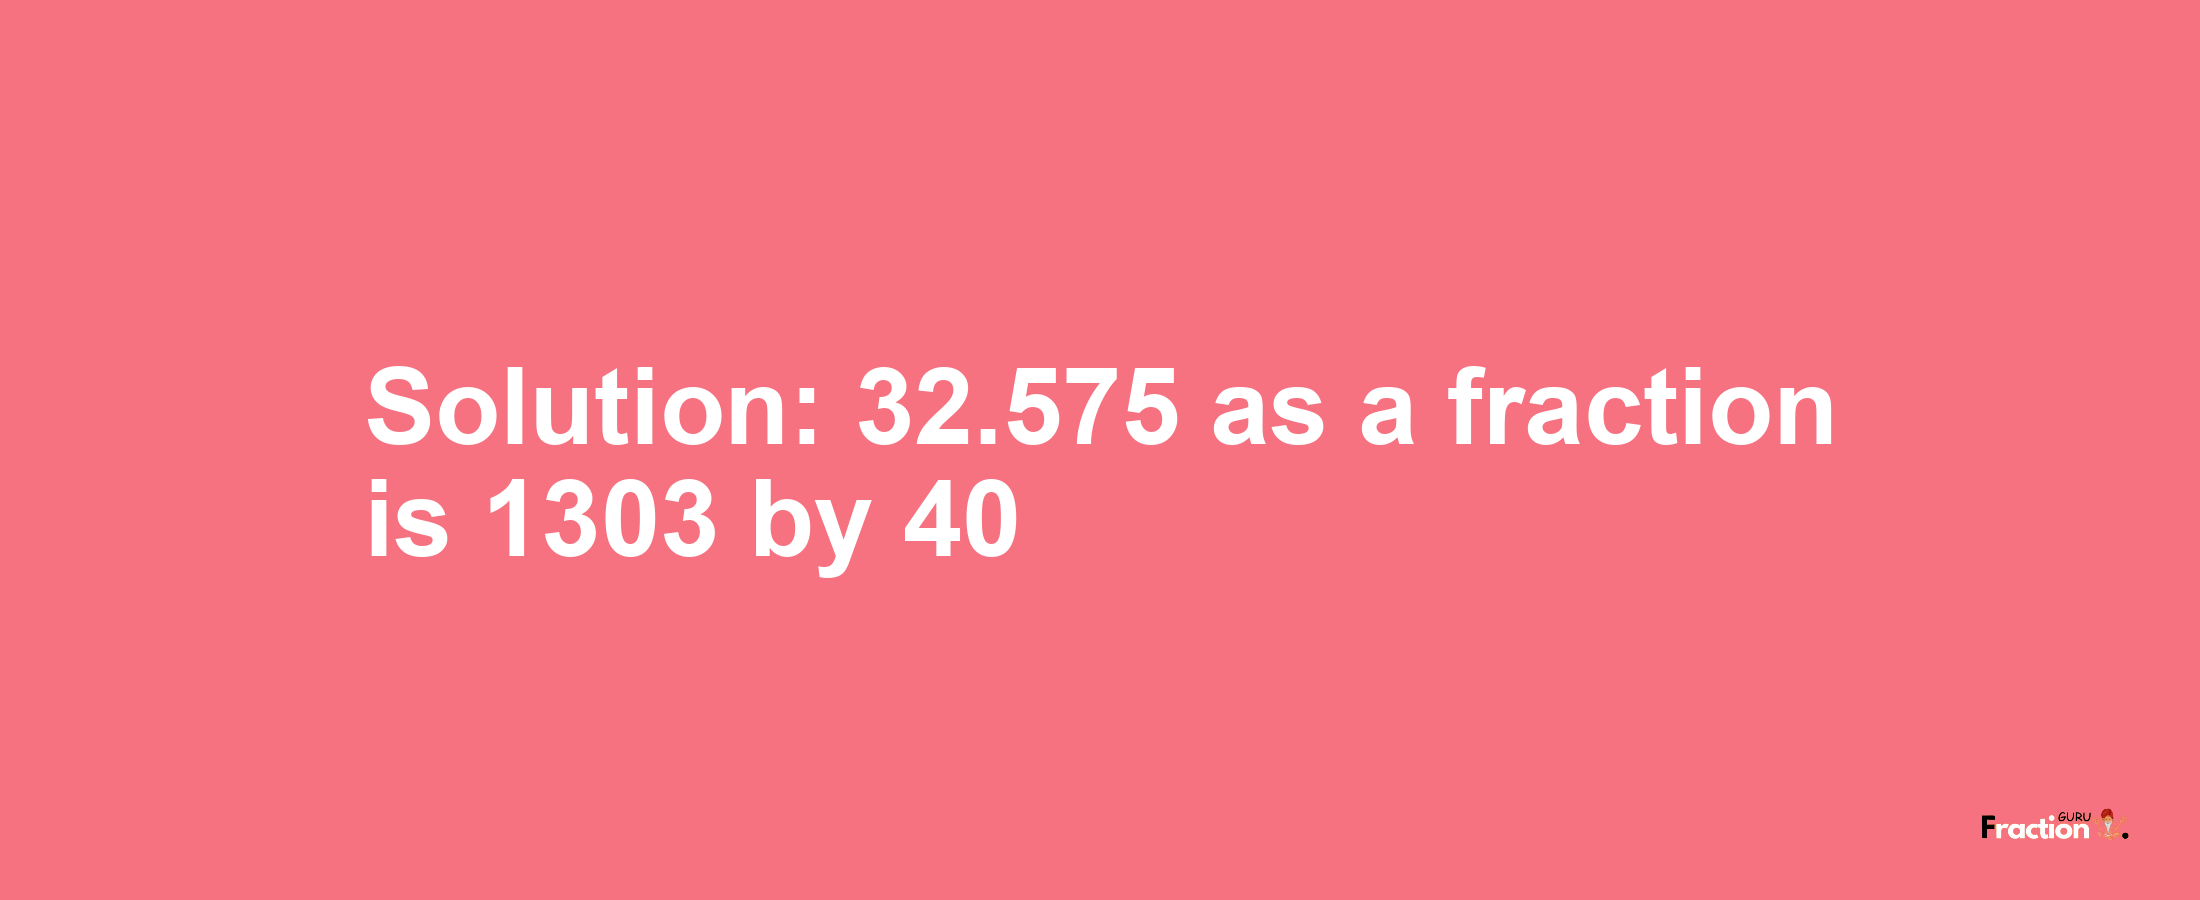 Solution:32.575 as a fraction is 1303/40